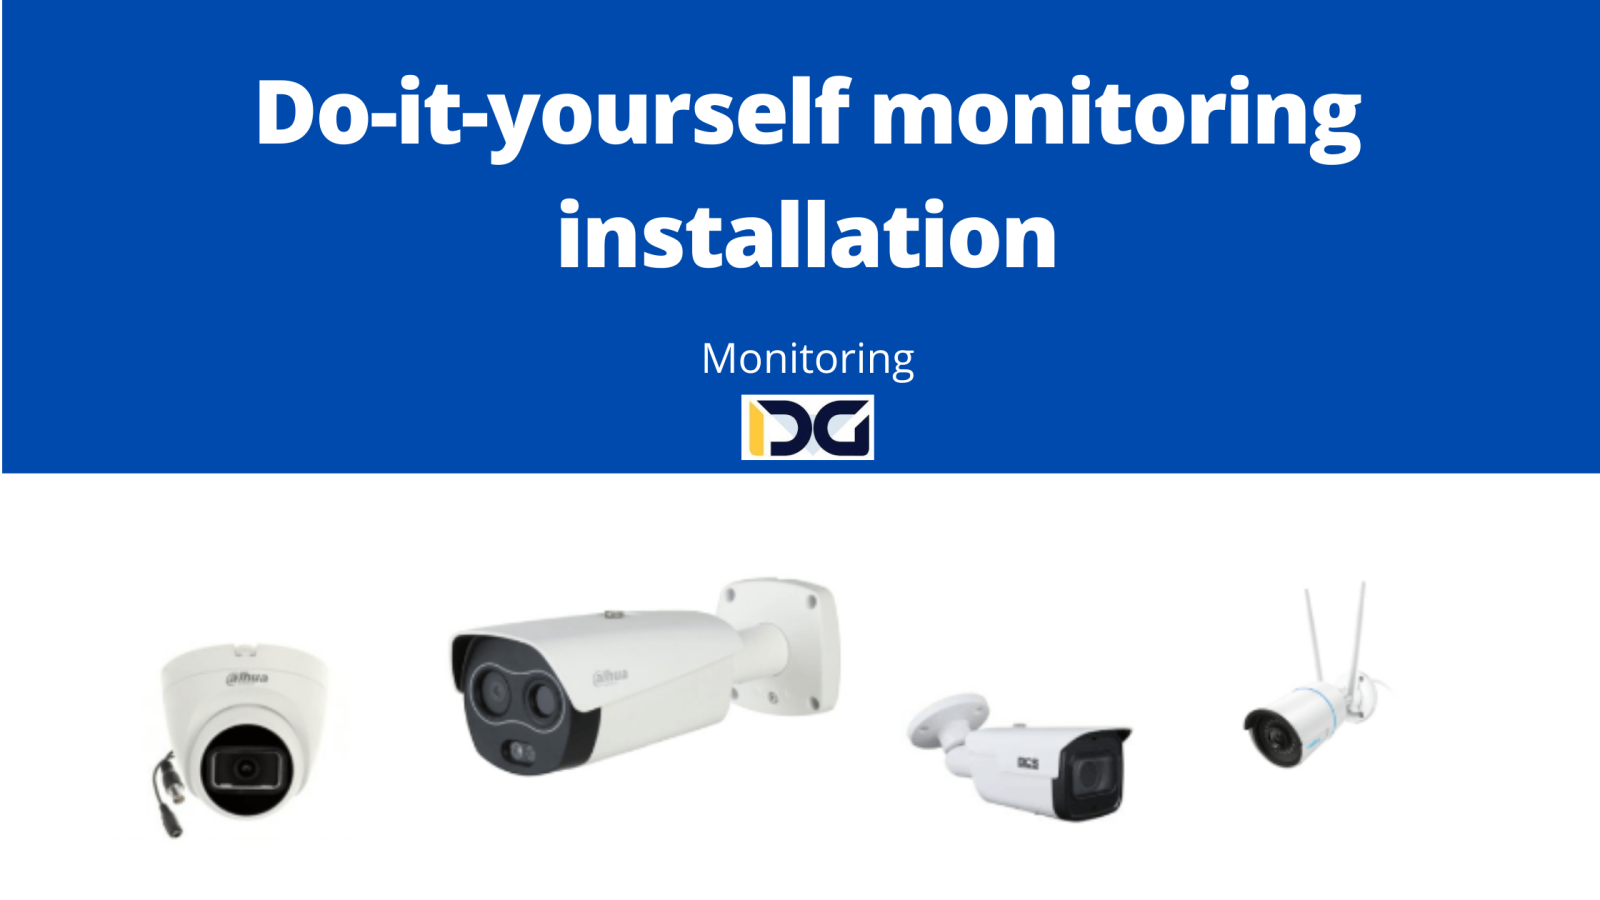 Do-it-yourself monitoring installation